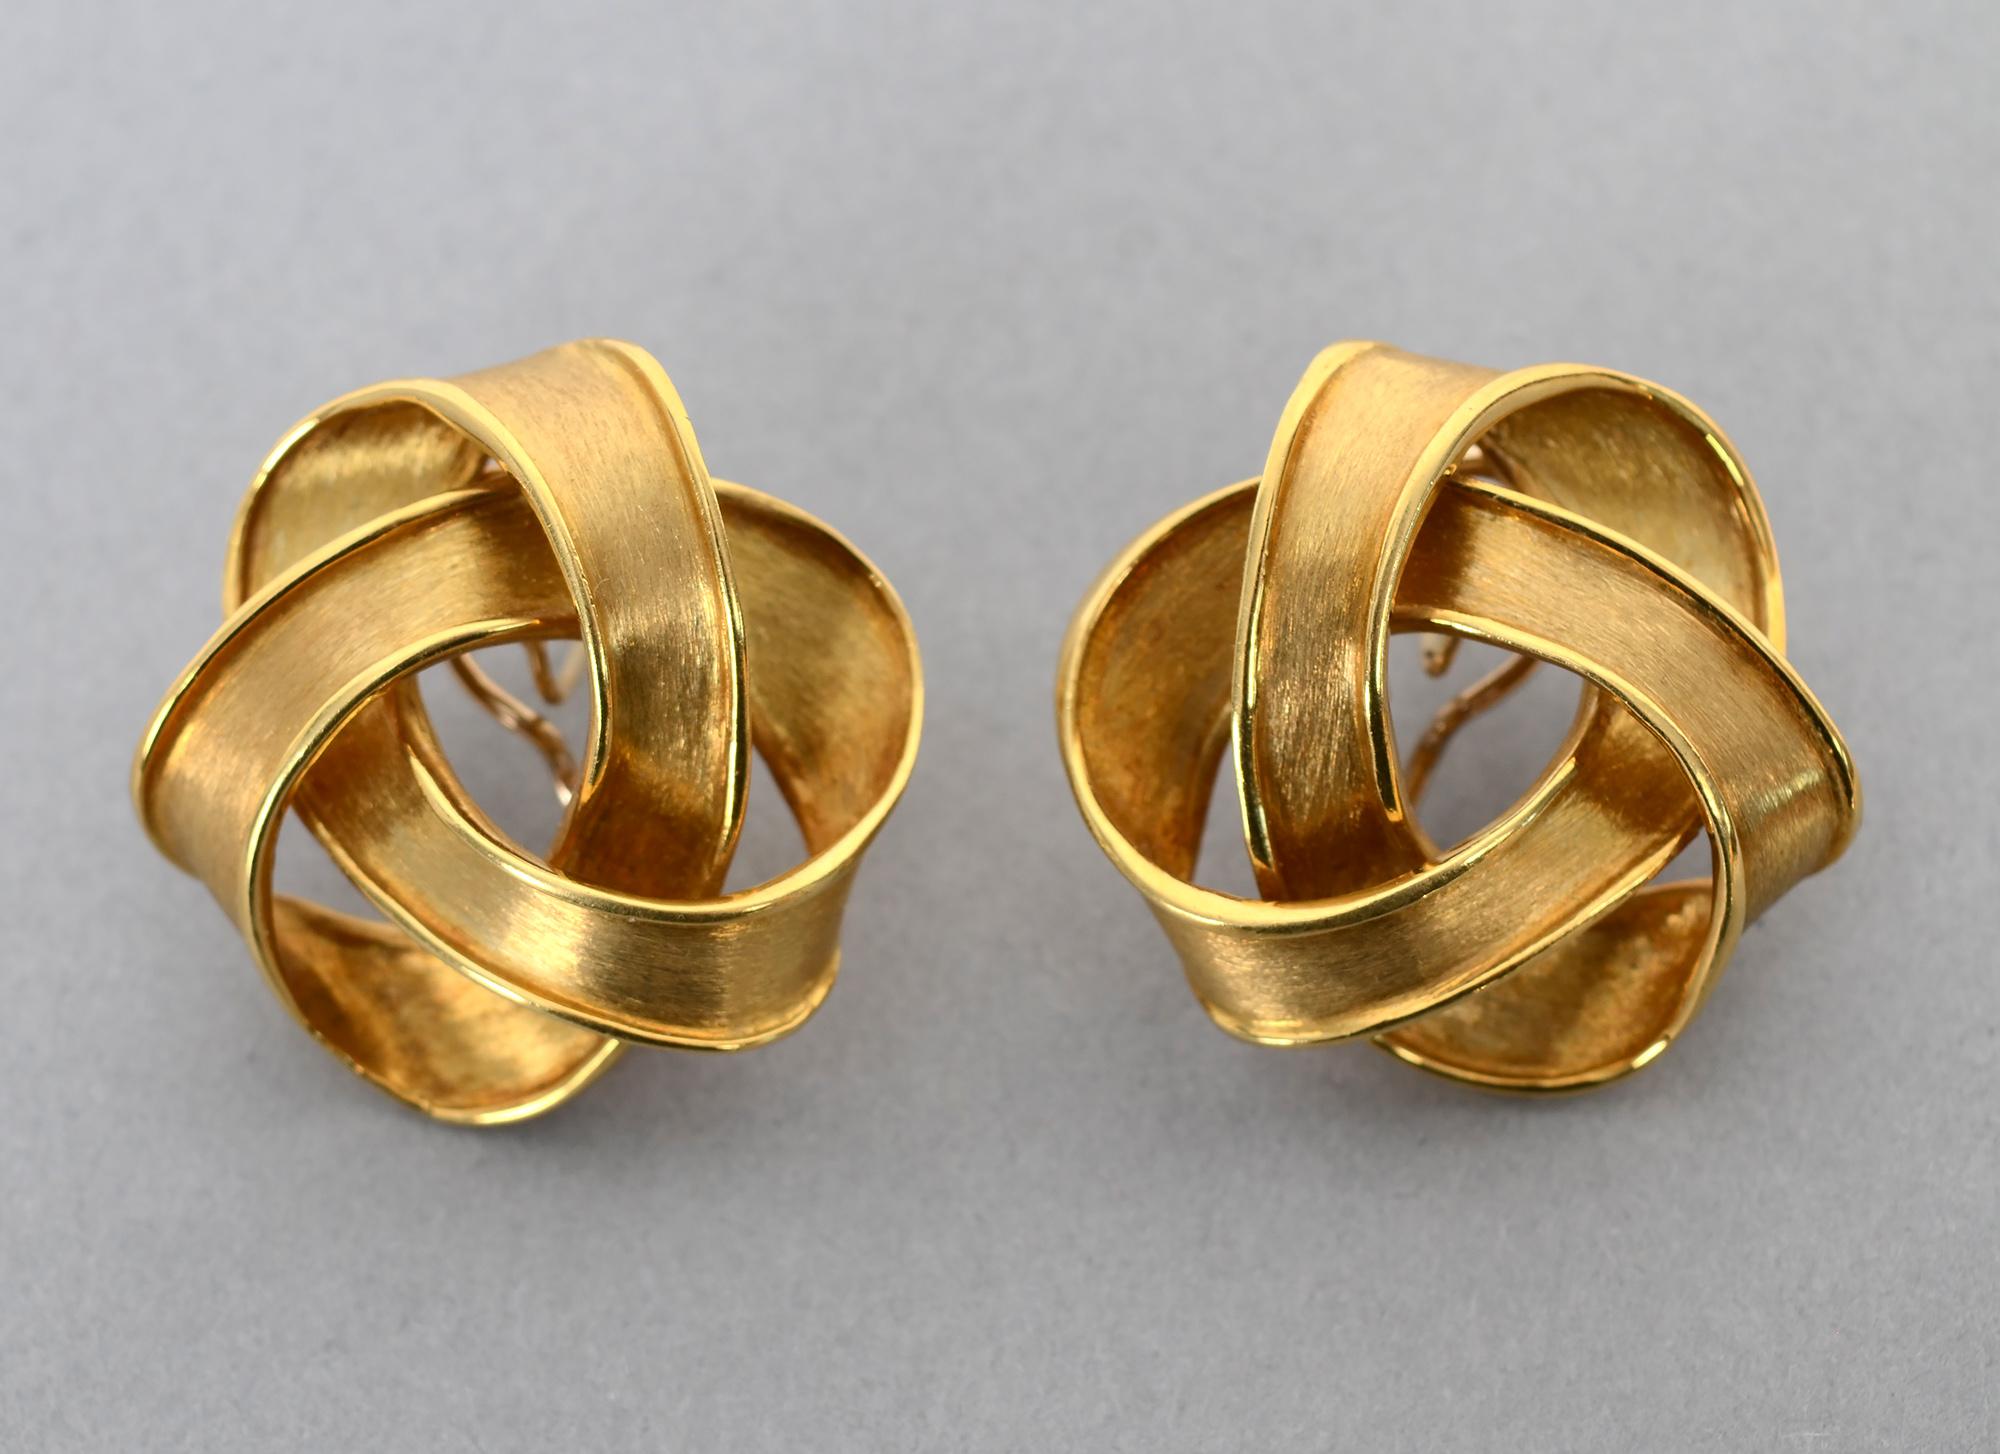 Large, sporty 18 karat gold earrings by the late New York designer, Boris LeBeau. The swirled design looks like intertwined ribbons.
The earrings  measure 1 7/16